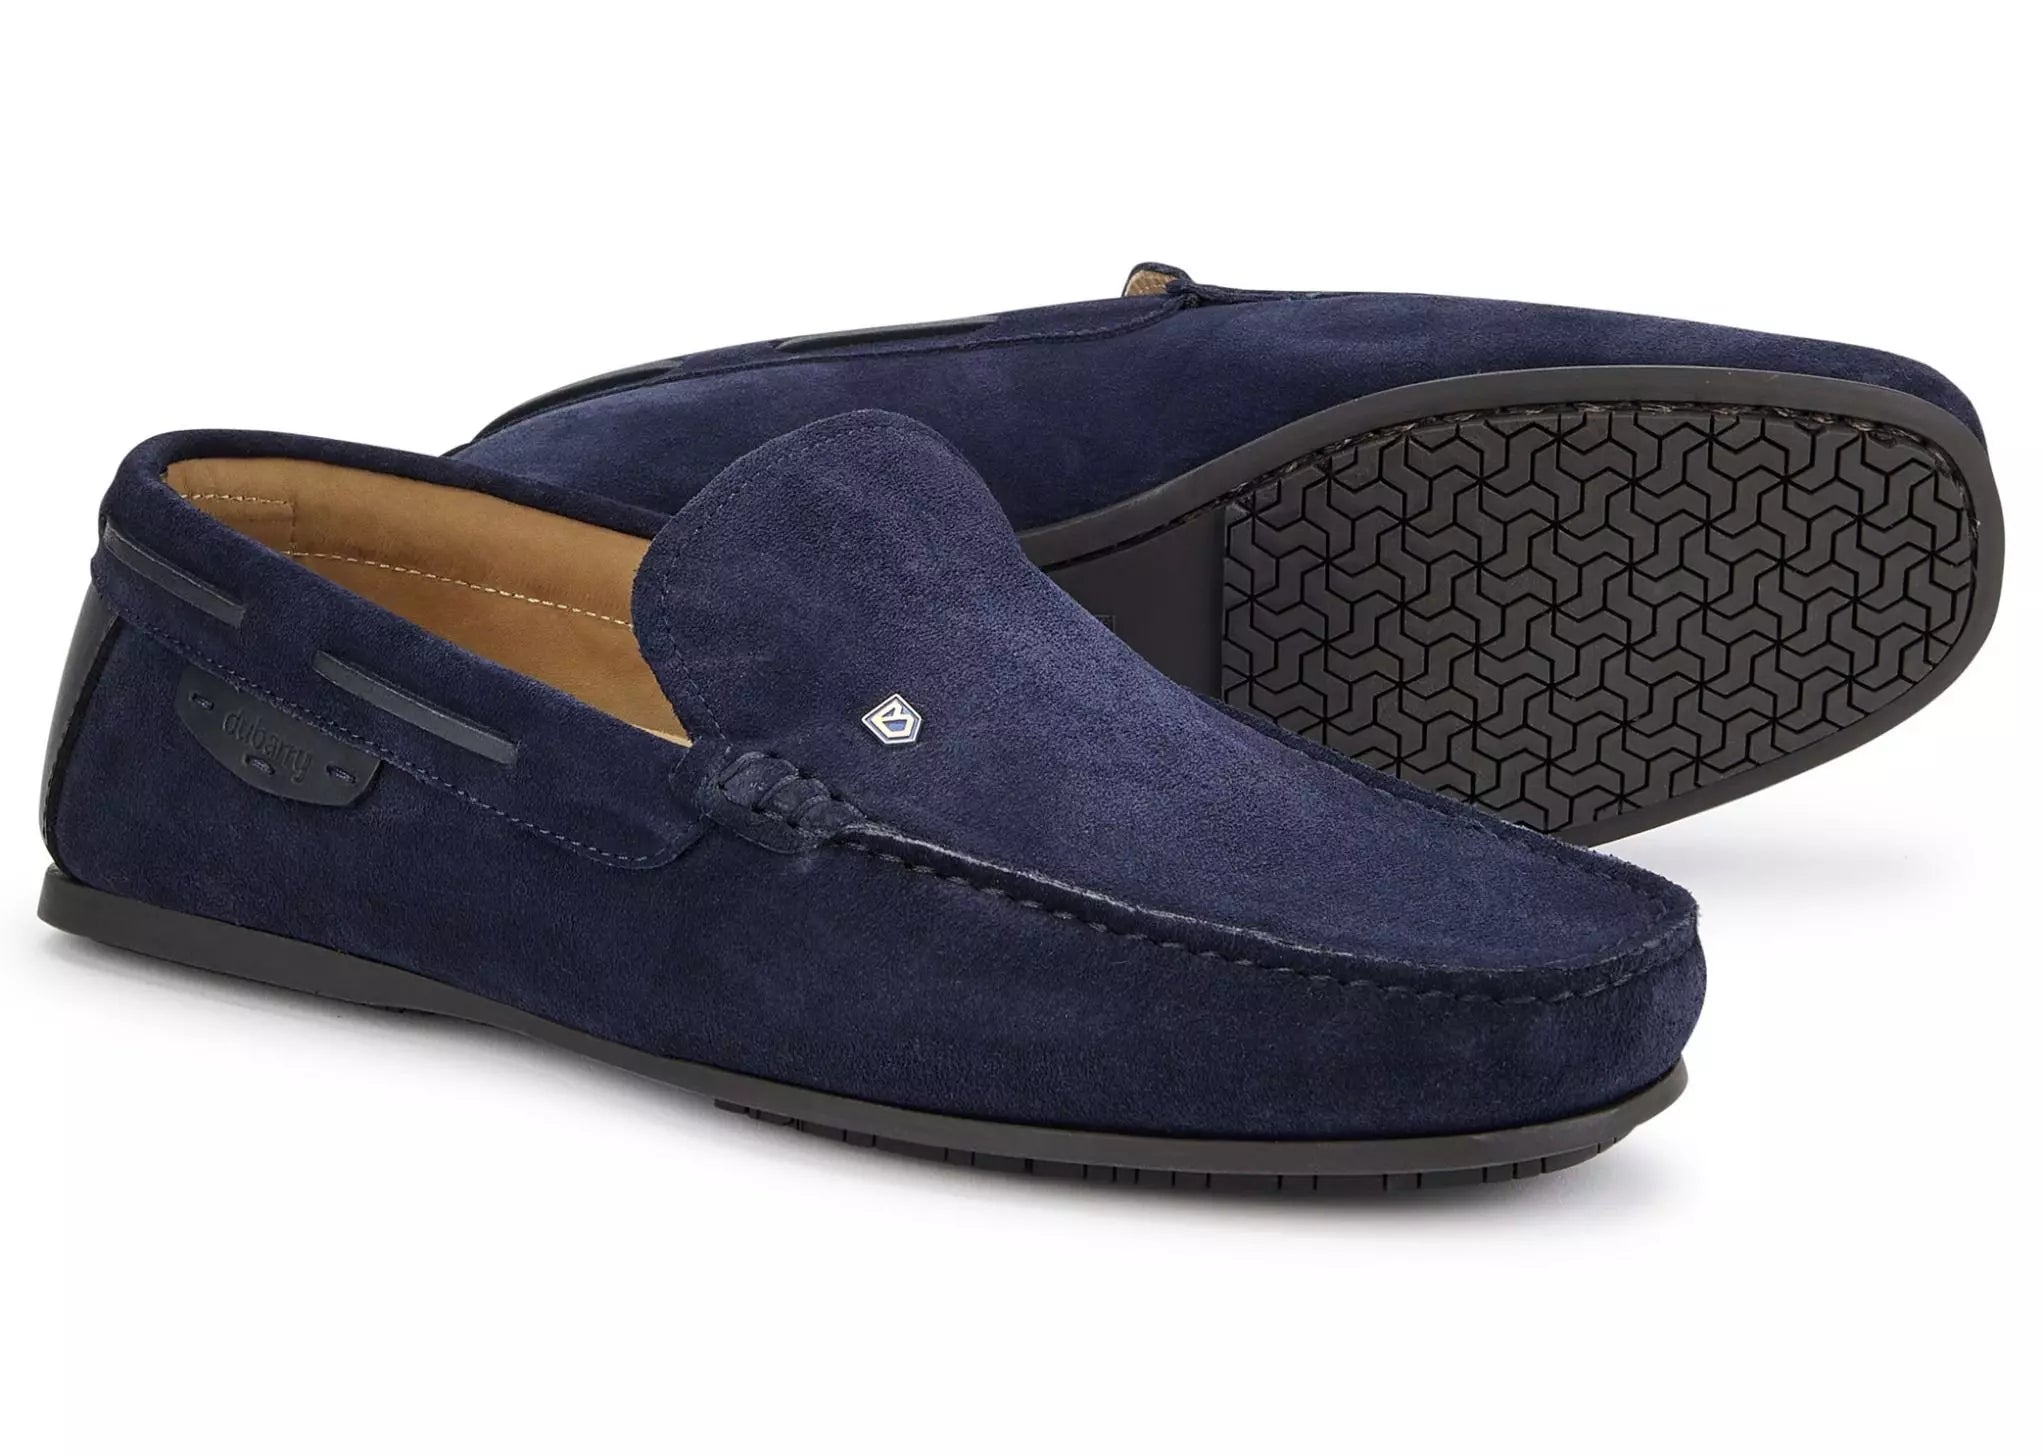 DUBARRY Fiji Suede Loafers - Men's - French Navy